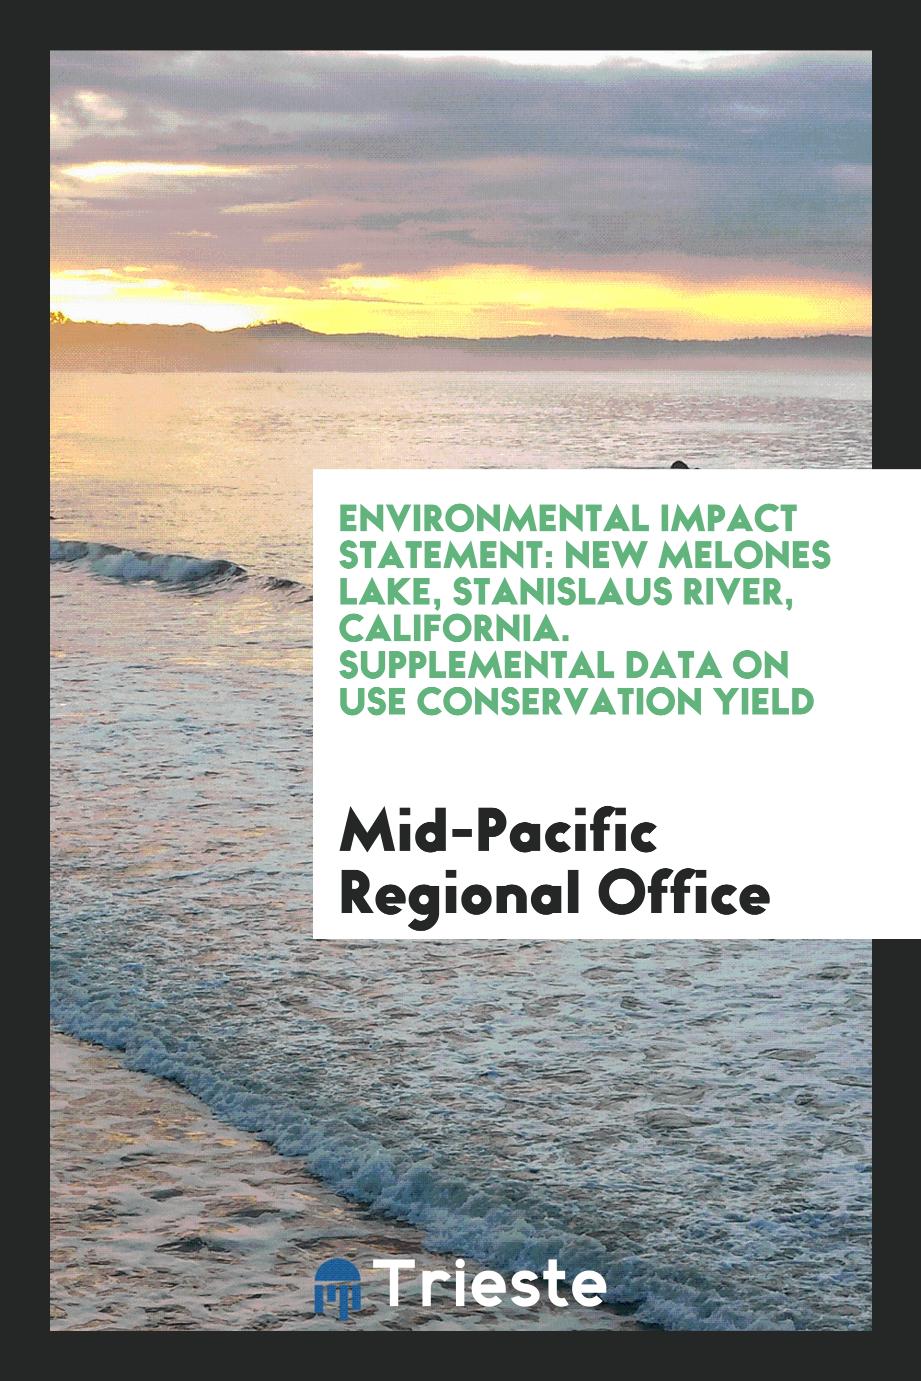 Environmental Impact Statement: New Melones Lake, Stanislaus River, California. Supplemental Data on Use Conservation Yield